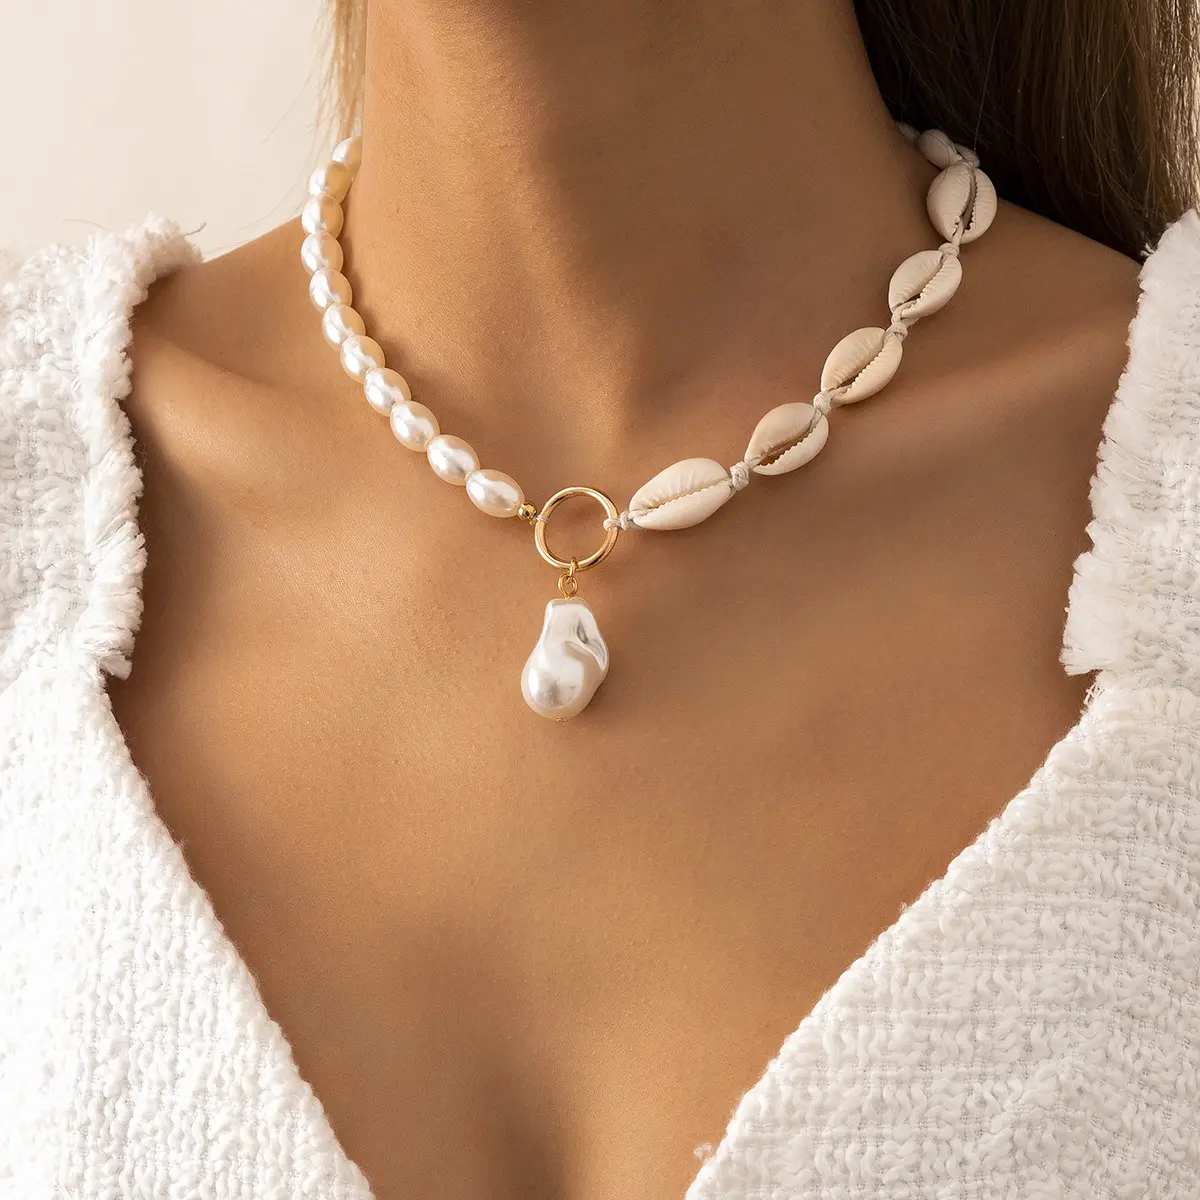 Wholesale Elegant Gold Plated Bead Chain Pearl Sea Shell Pendant Necklace For Women